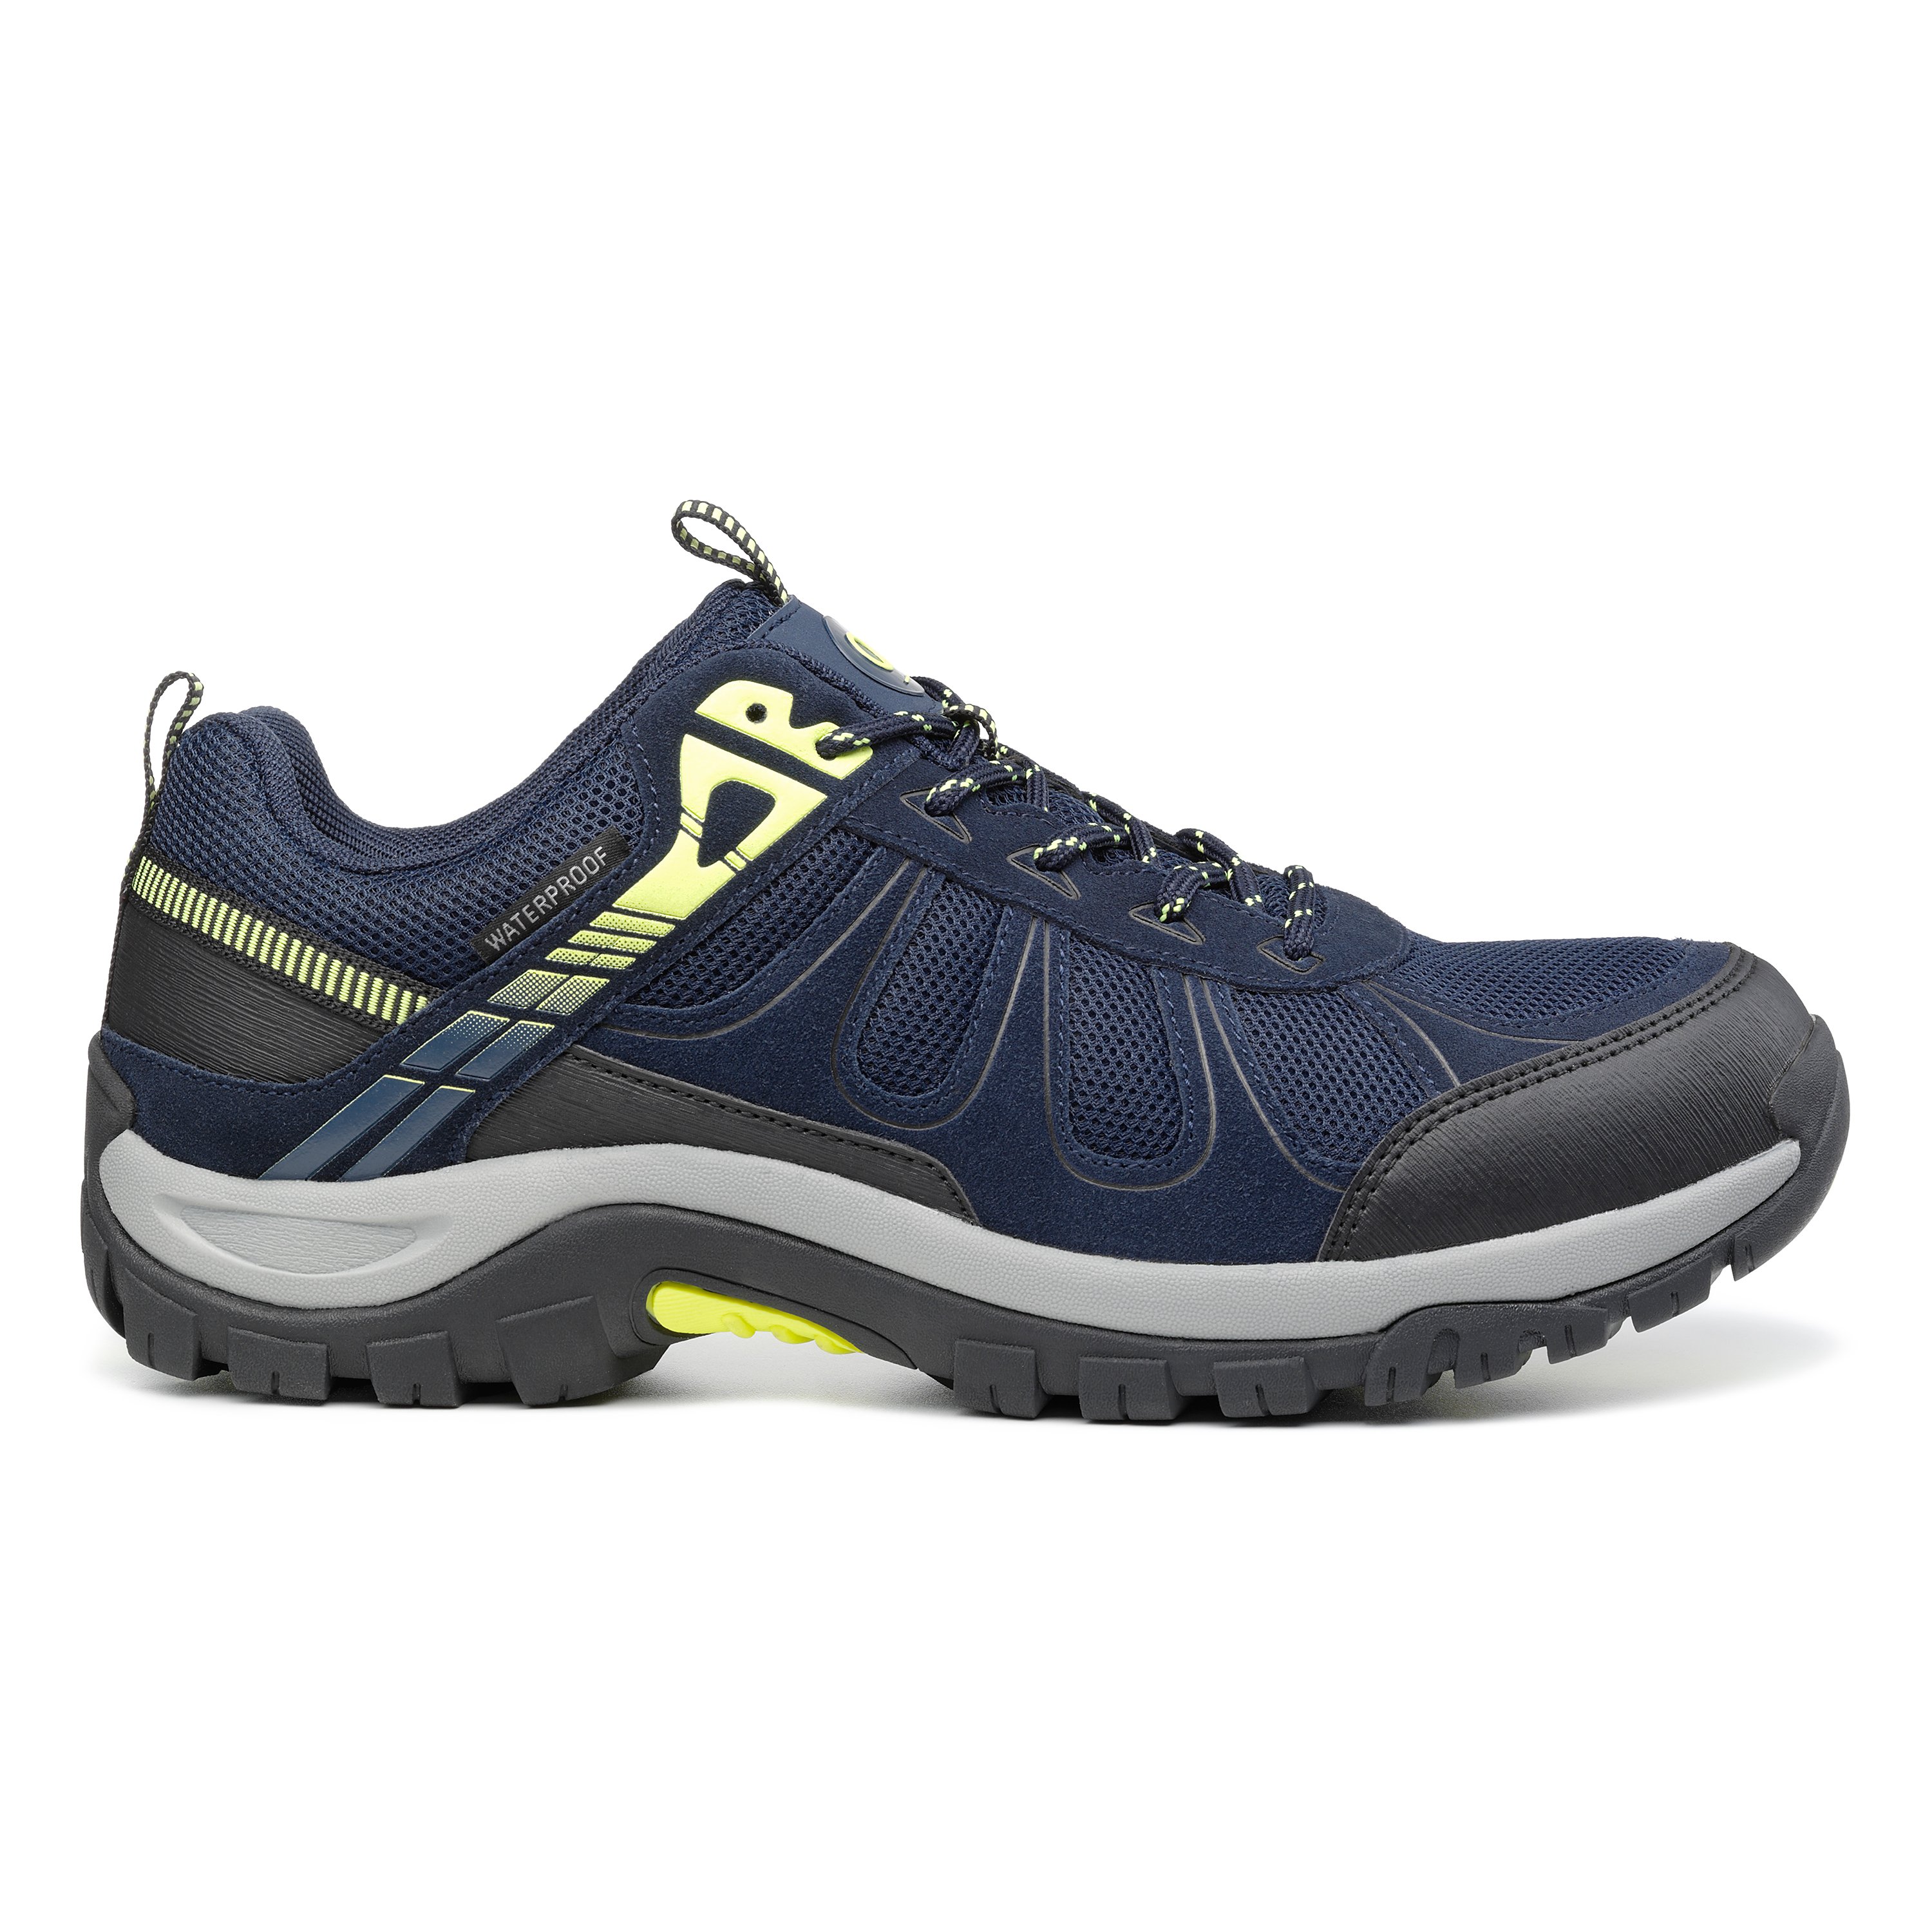 Navy / Grey | Expedition WP Shoes |Hotter UK